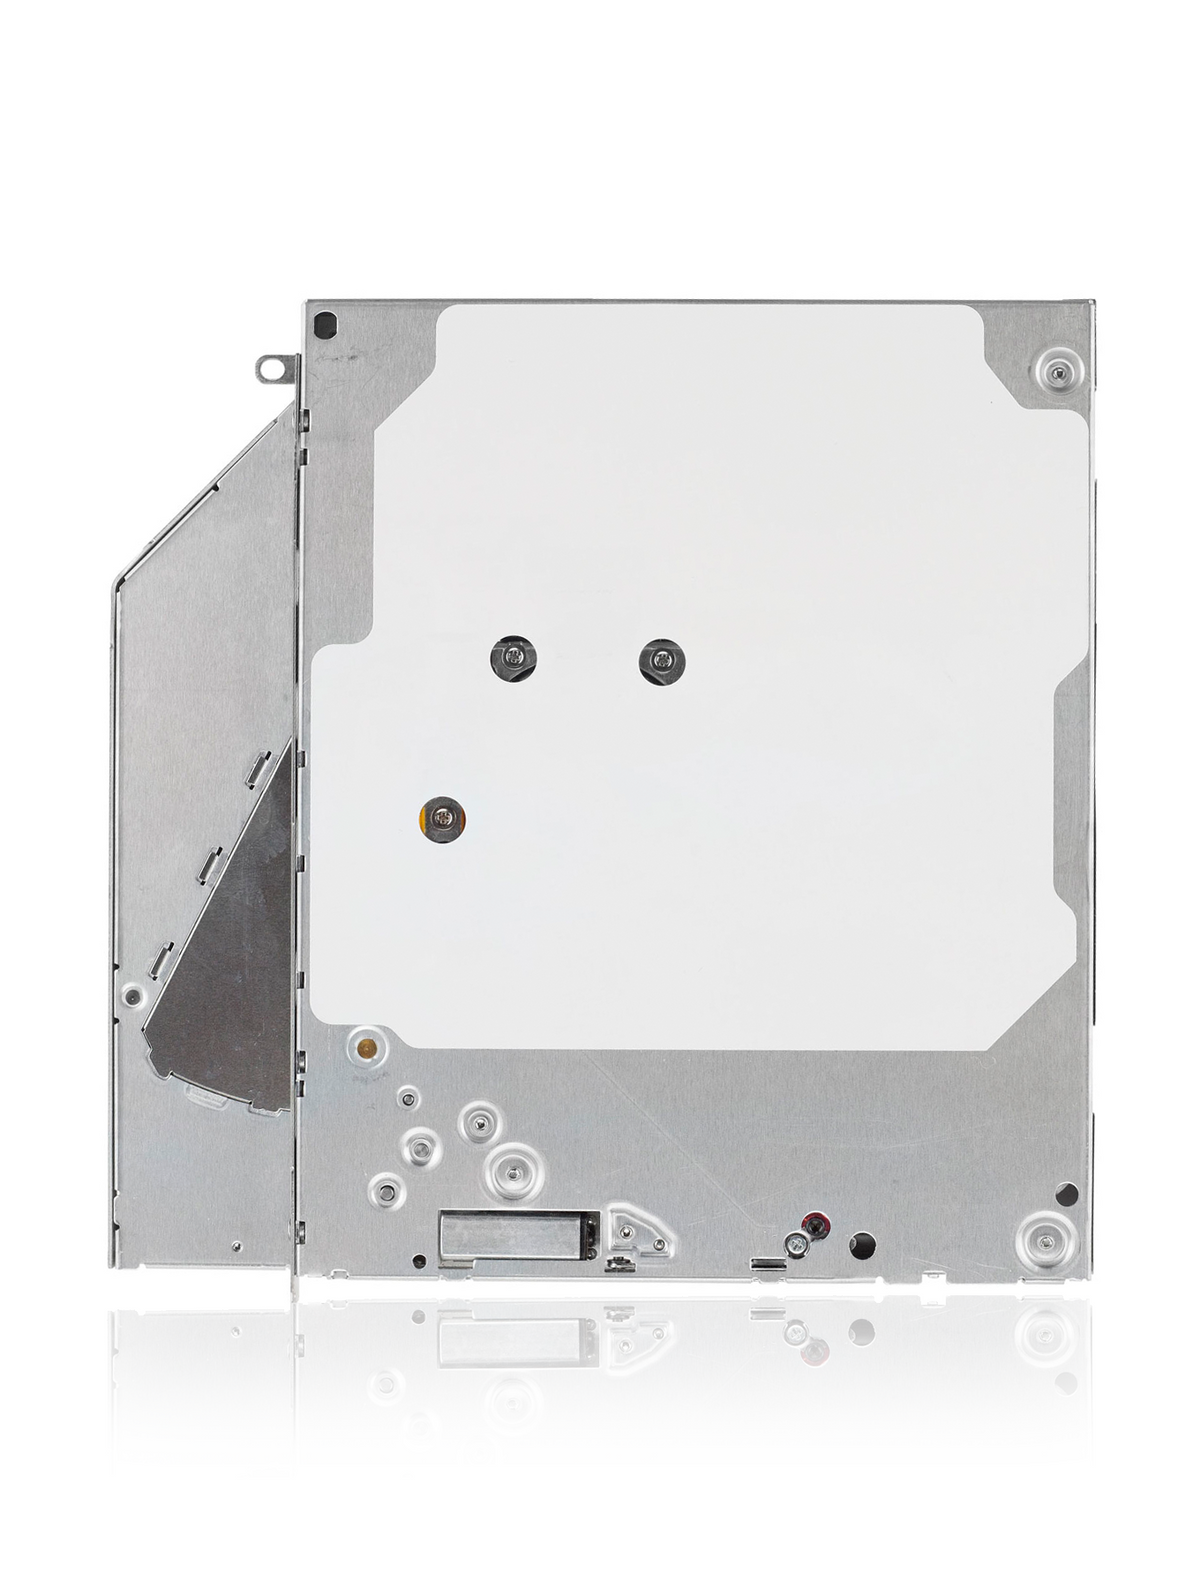 SUPERDRIVE (UJ867A) COMPATIBLE FOR MACBOOK 13" A1181 (EARLY 2009 - MID 2009)